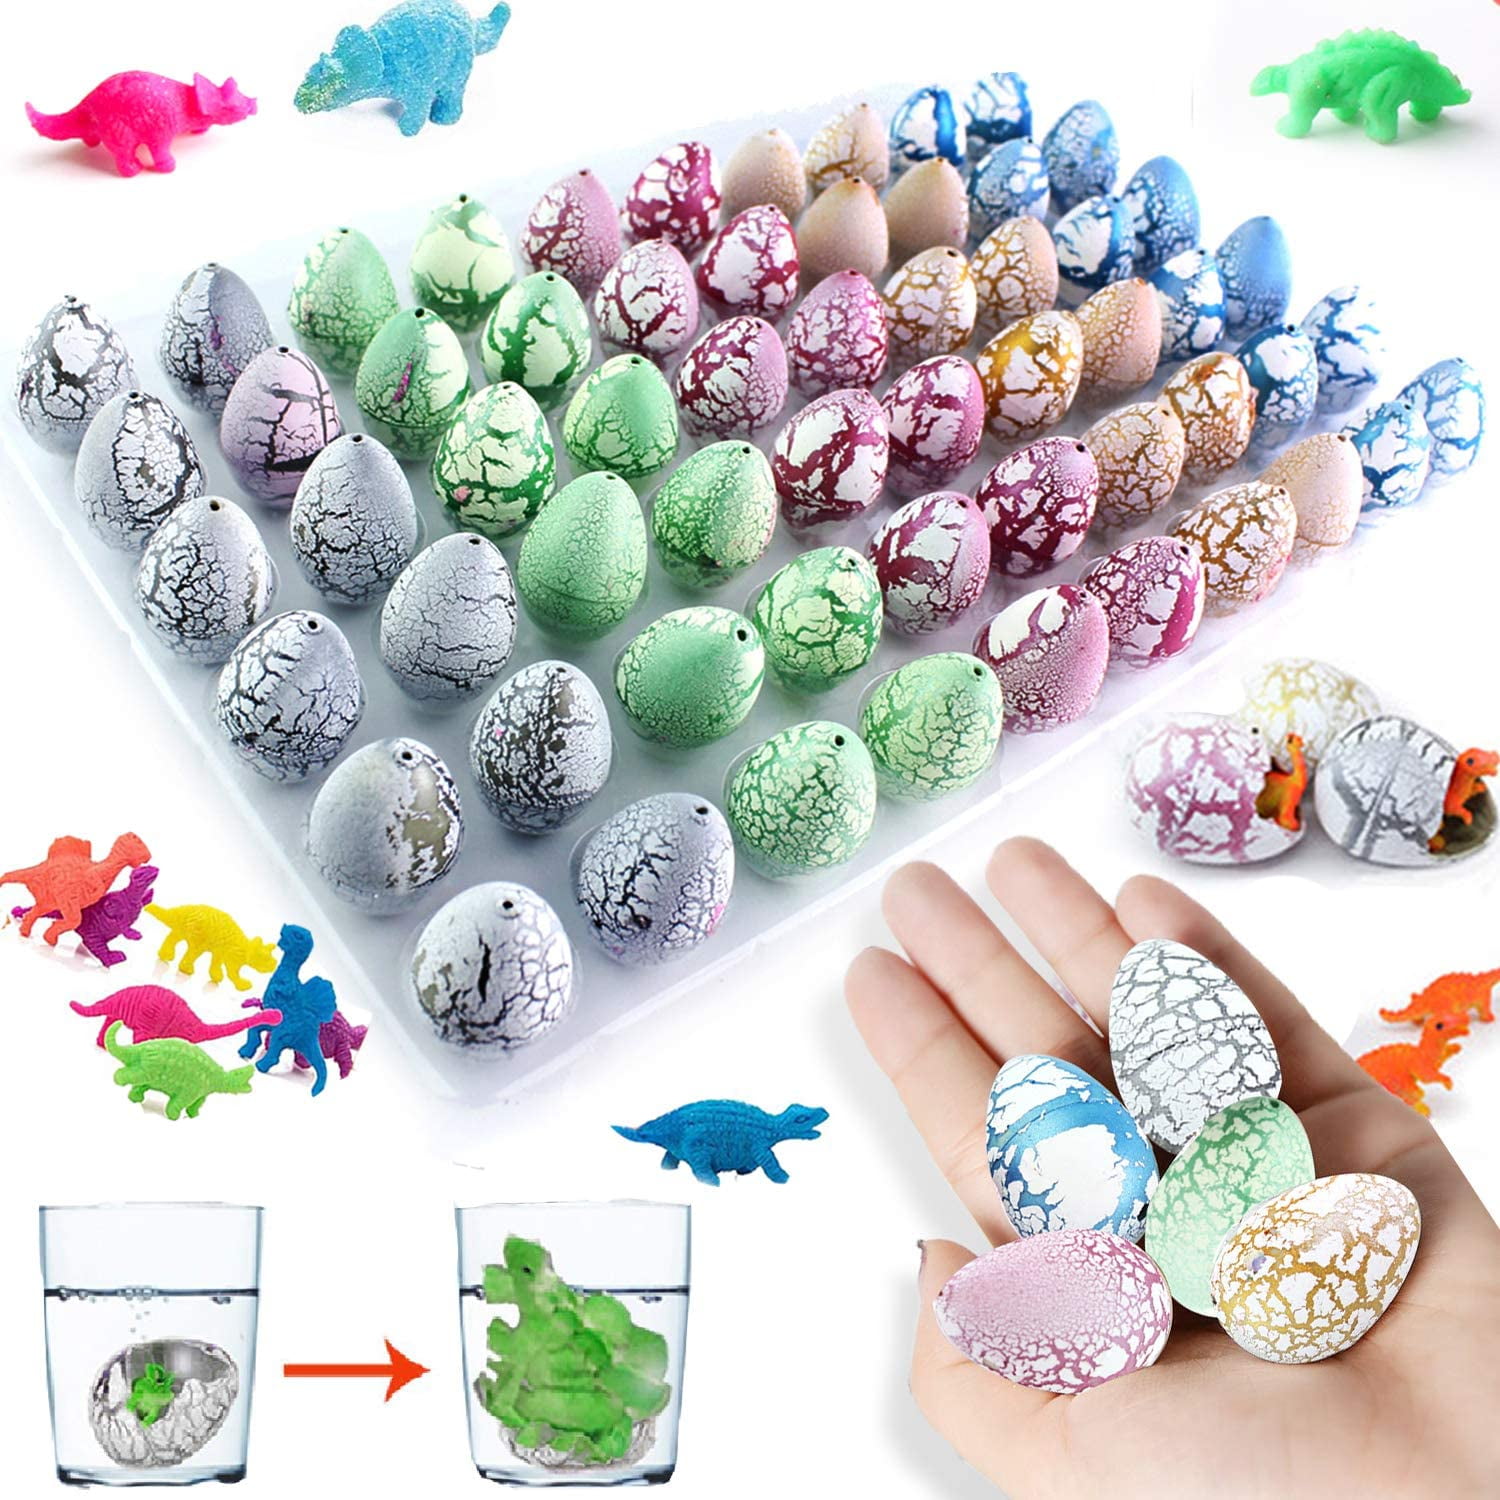 Details about   Dinosaur Eggs Toy Hatching Growing Dino Dragon for Children Large Size 